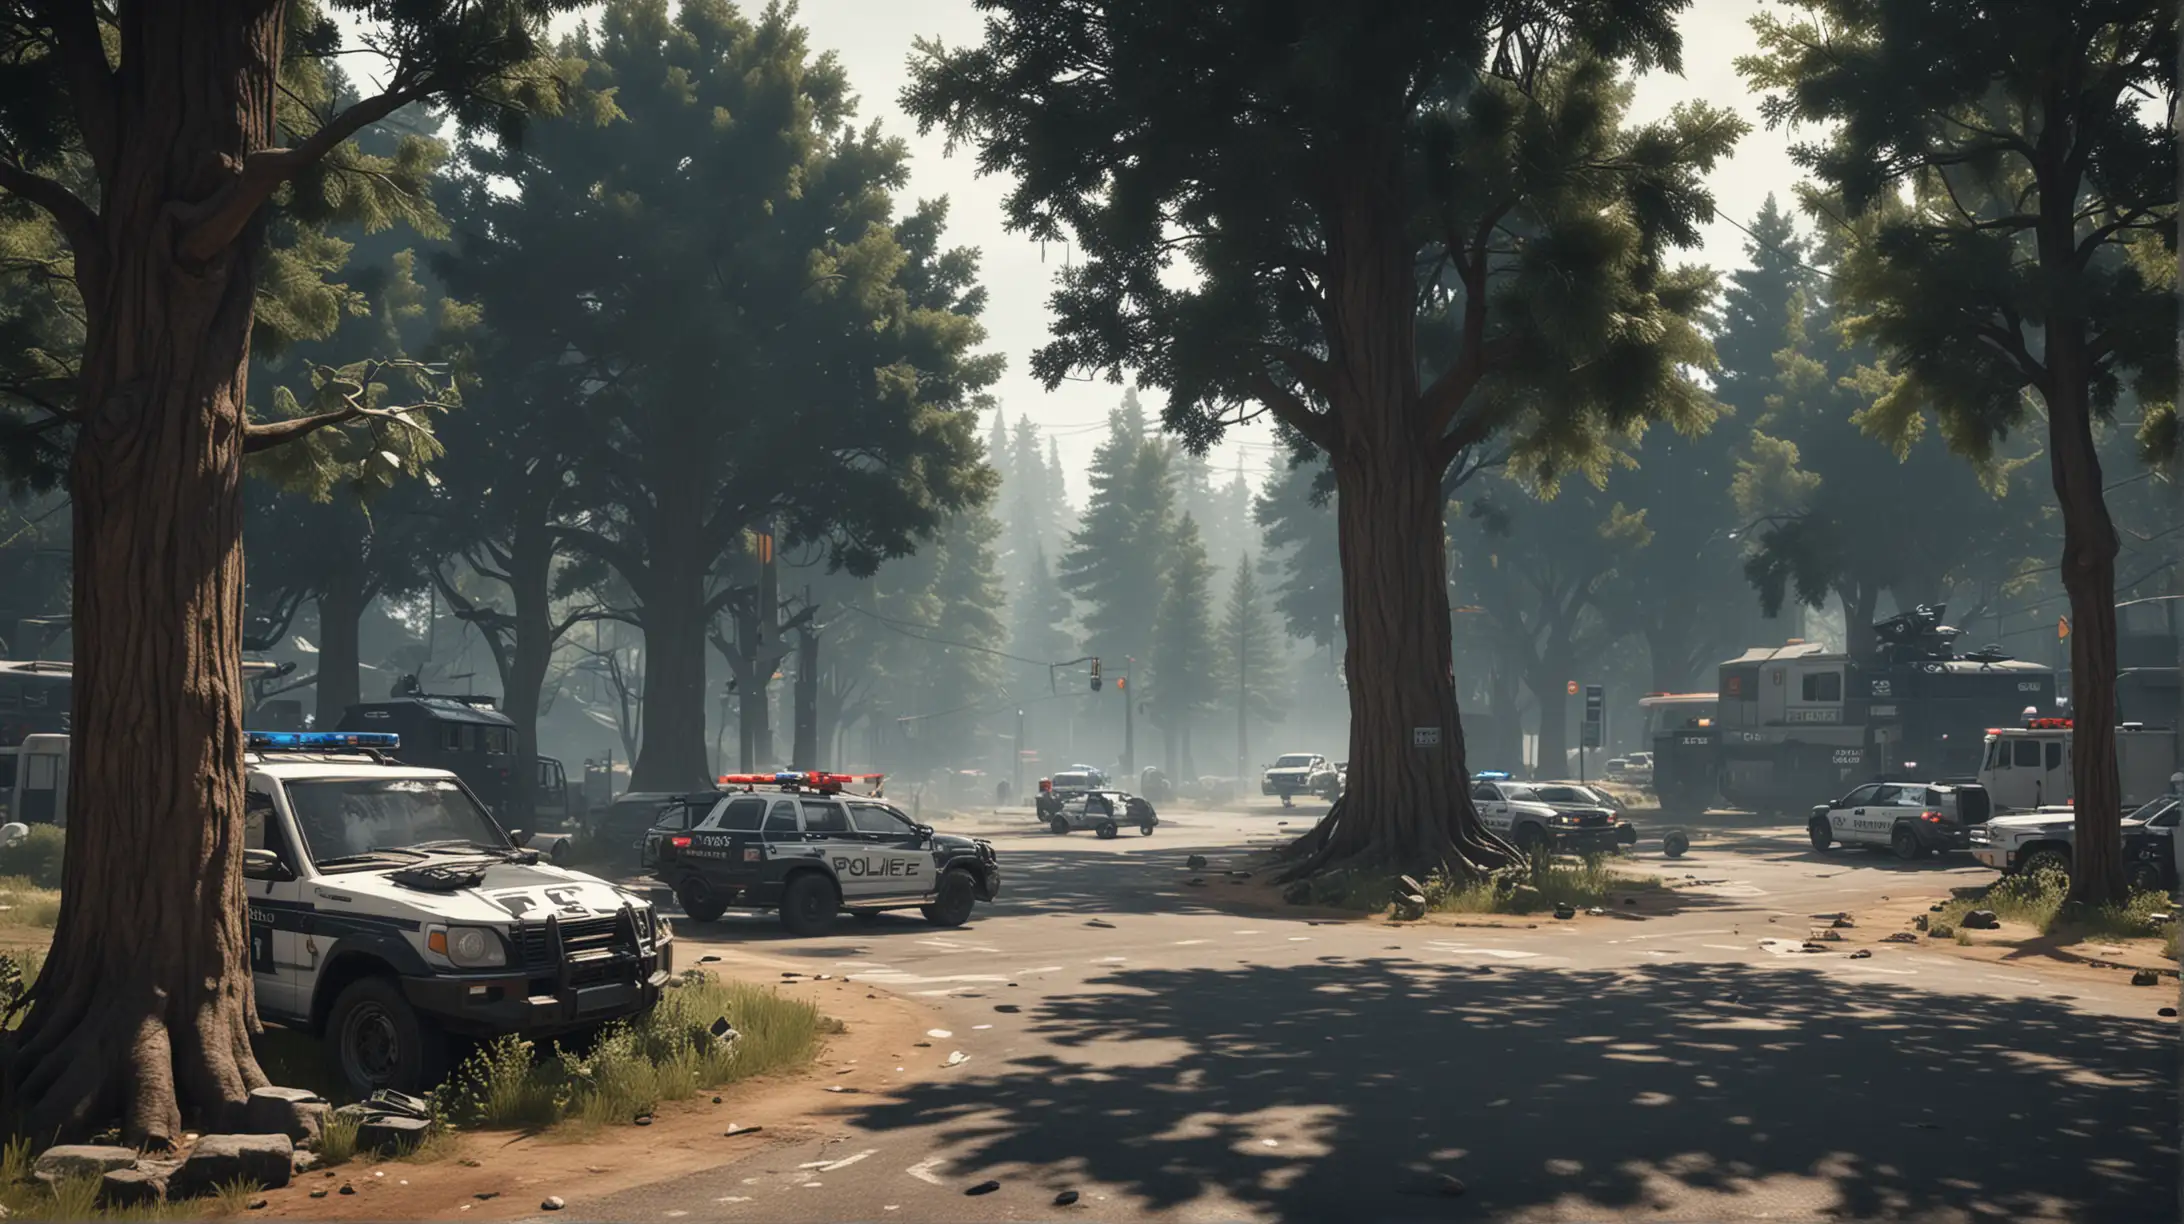 Mechanical SWAT Game Scene with Police Cars and Big Tree Background